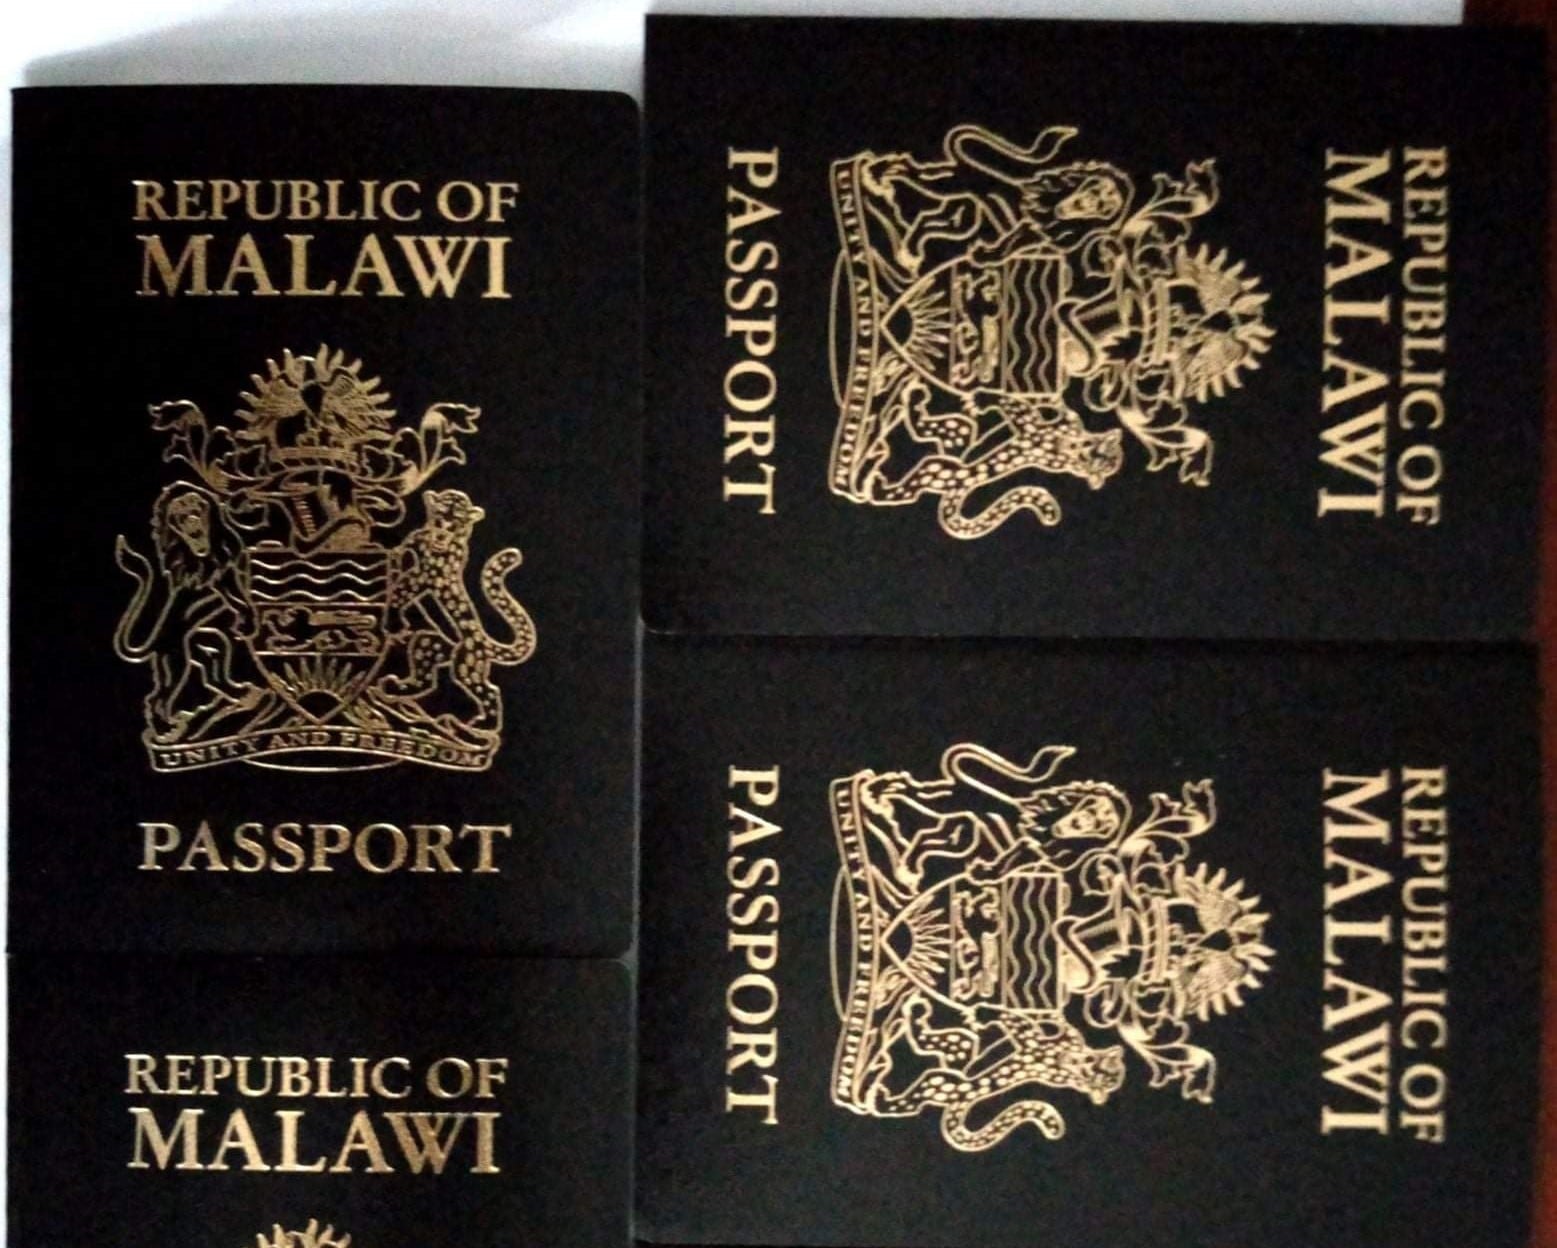 “Cyberattack Disrupts Malawi’s Immigration Service, Halts Passport Issuance”